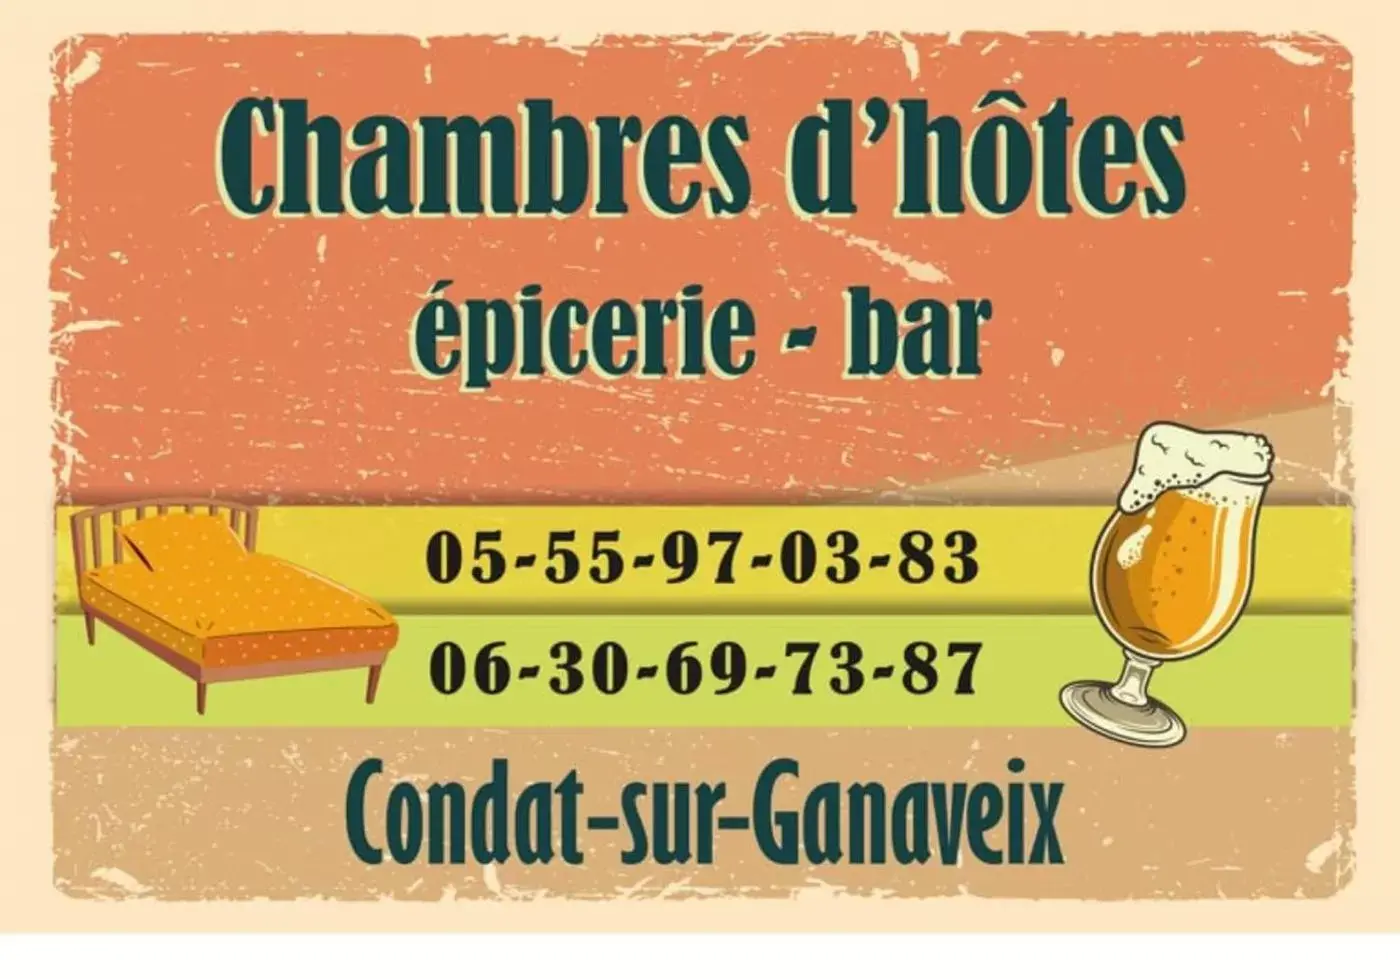 Property logo or sign in Chambres d'hotes Condat